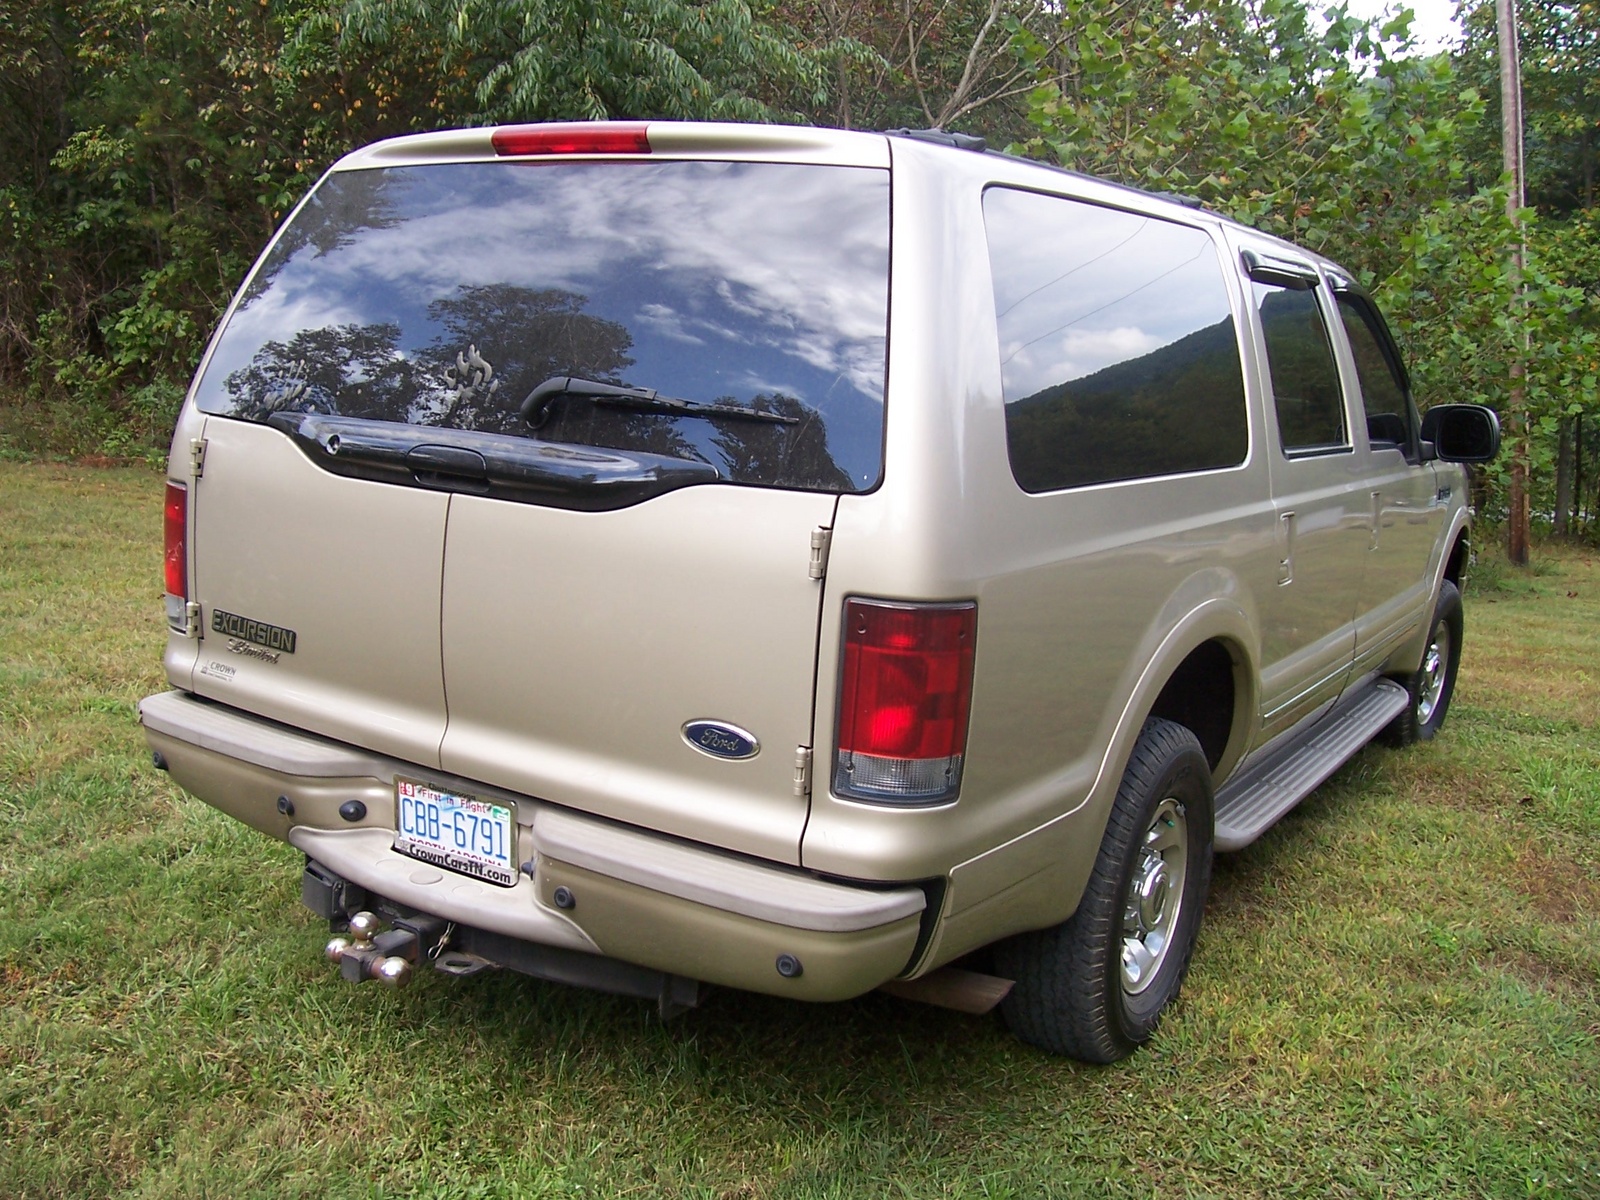 2002 Ford excursion limited mpg #1